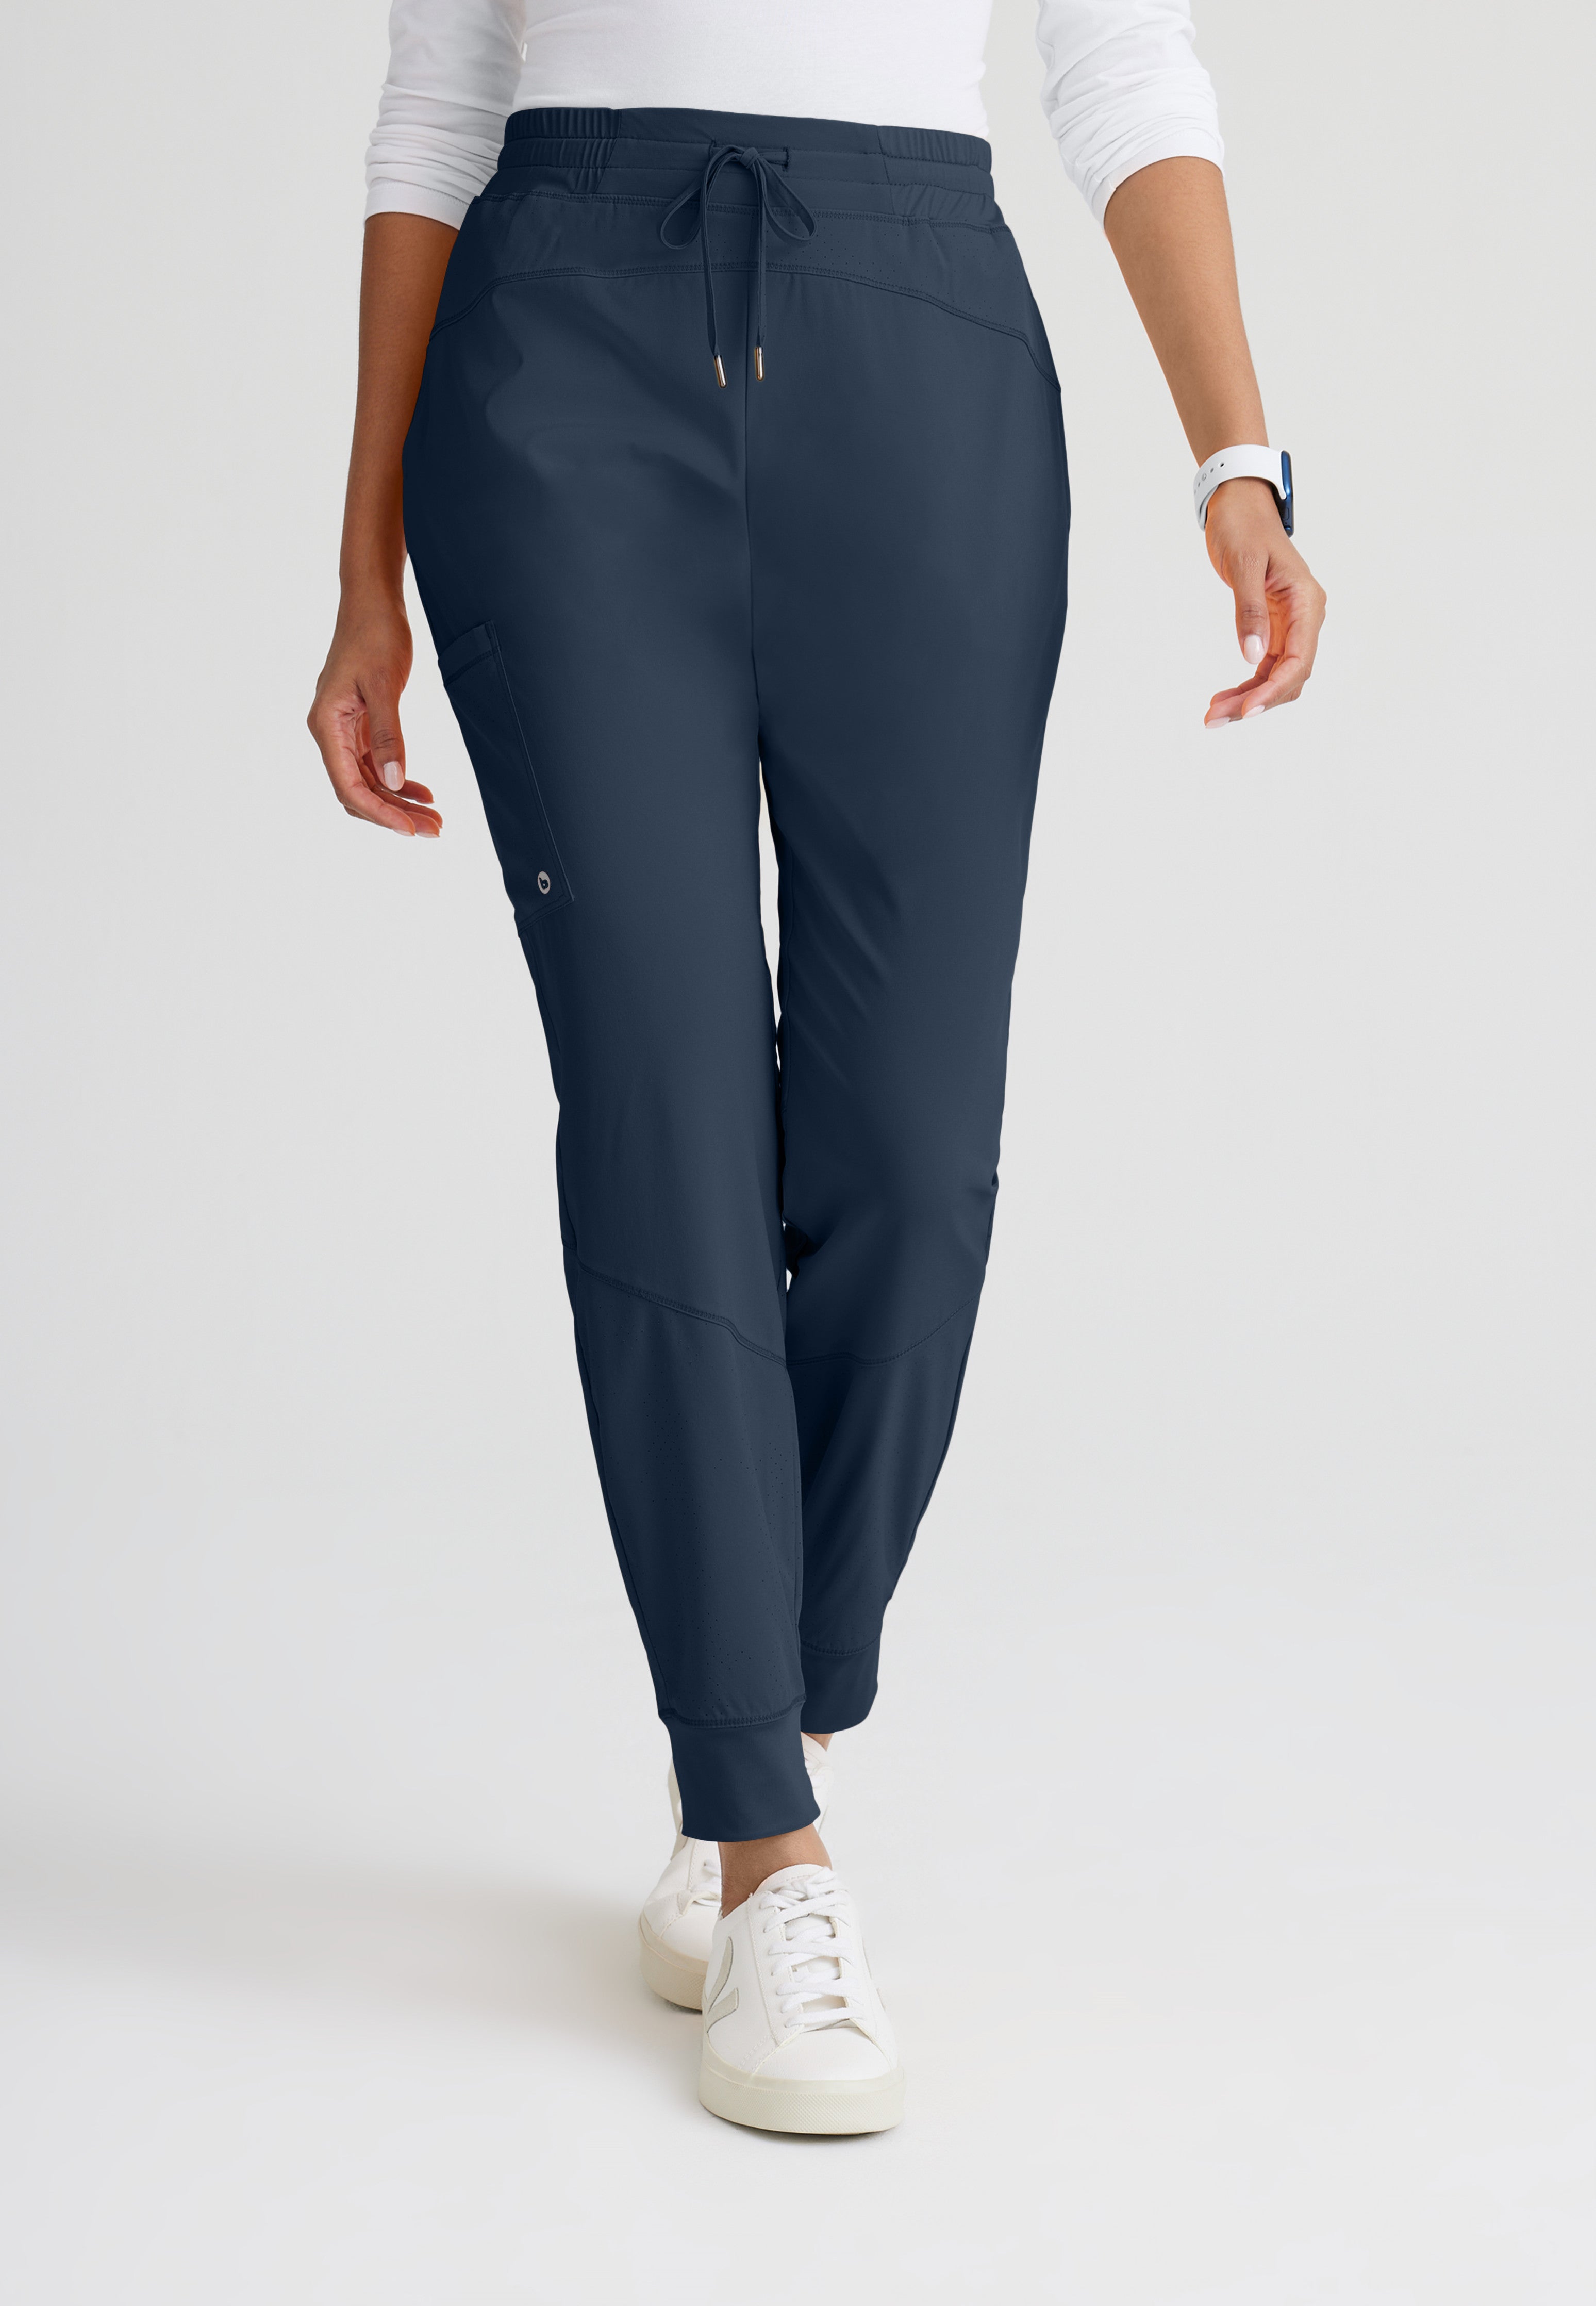 Buy the NWT Womens Gray Elastic Waist Tapered Fit Stretch Jogger